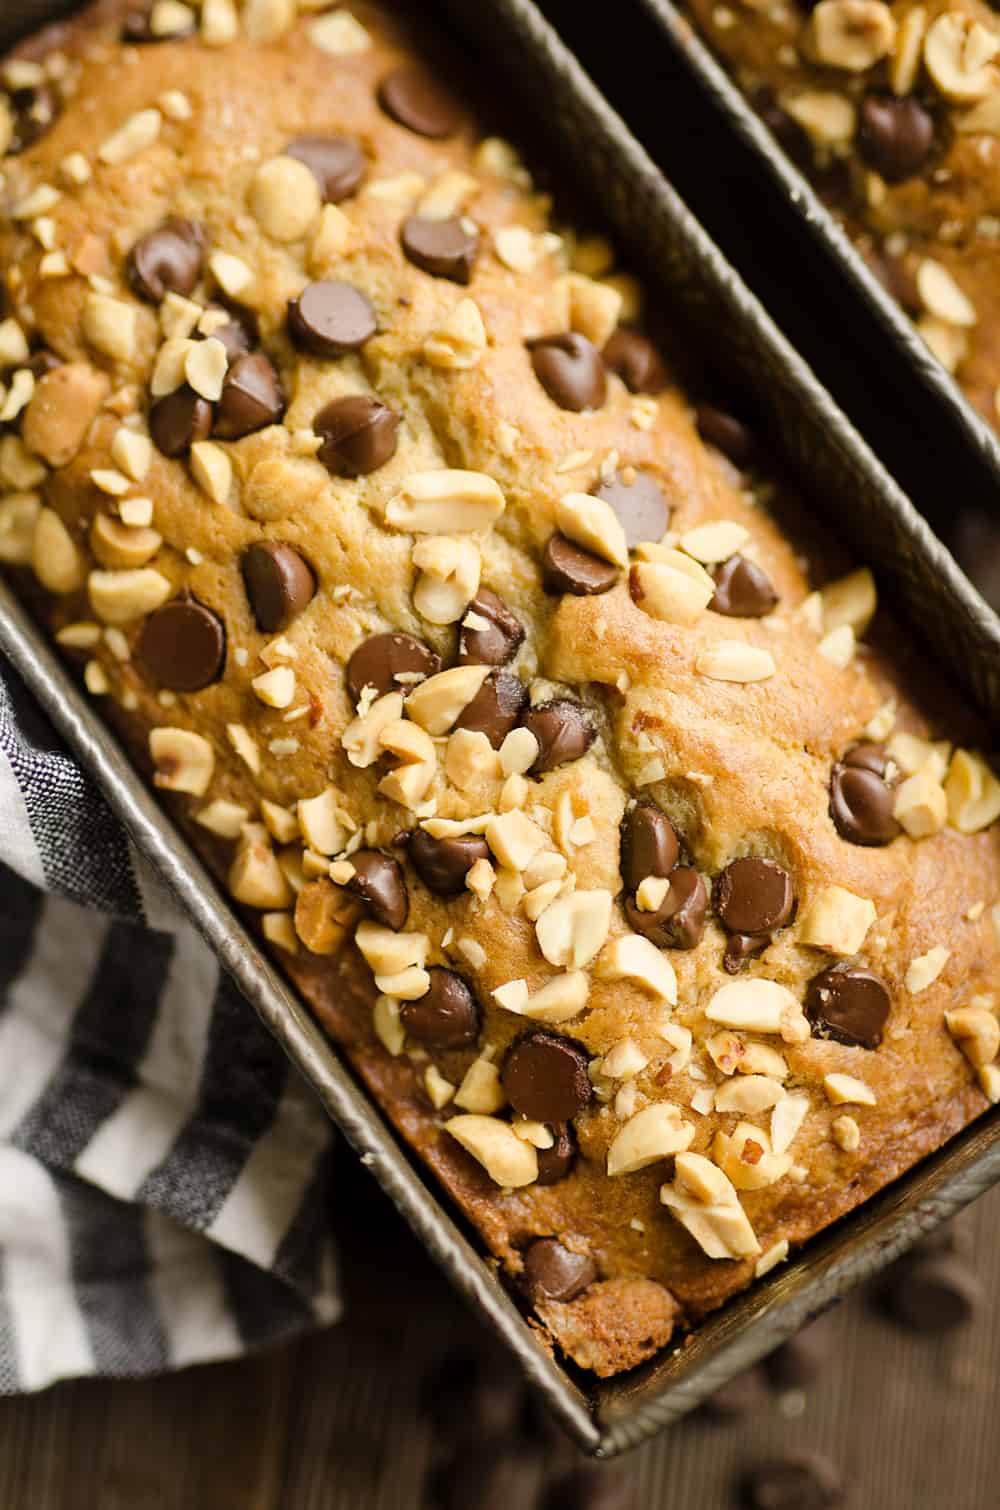 Peanut Butter Chocolate Banana Bread topped with salted peanuts